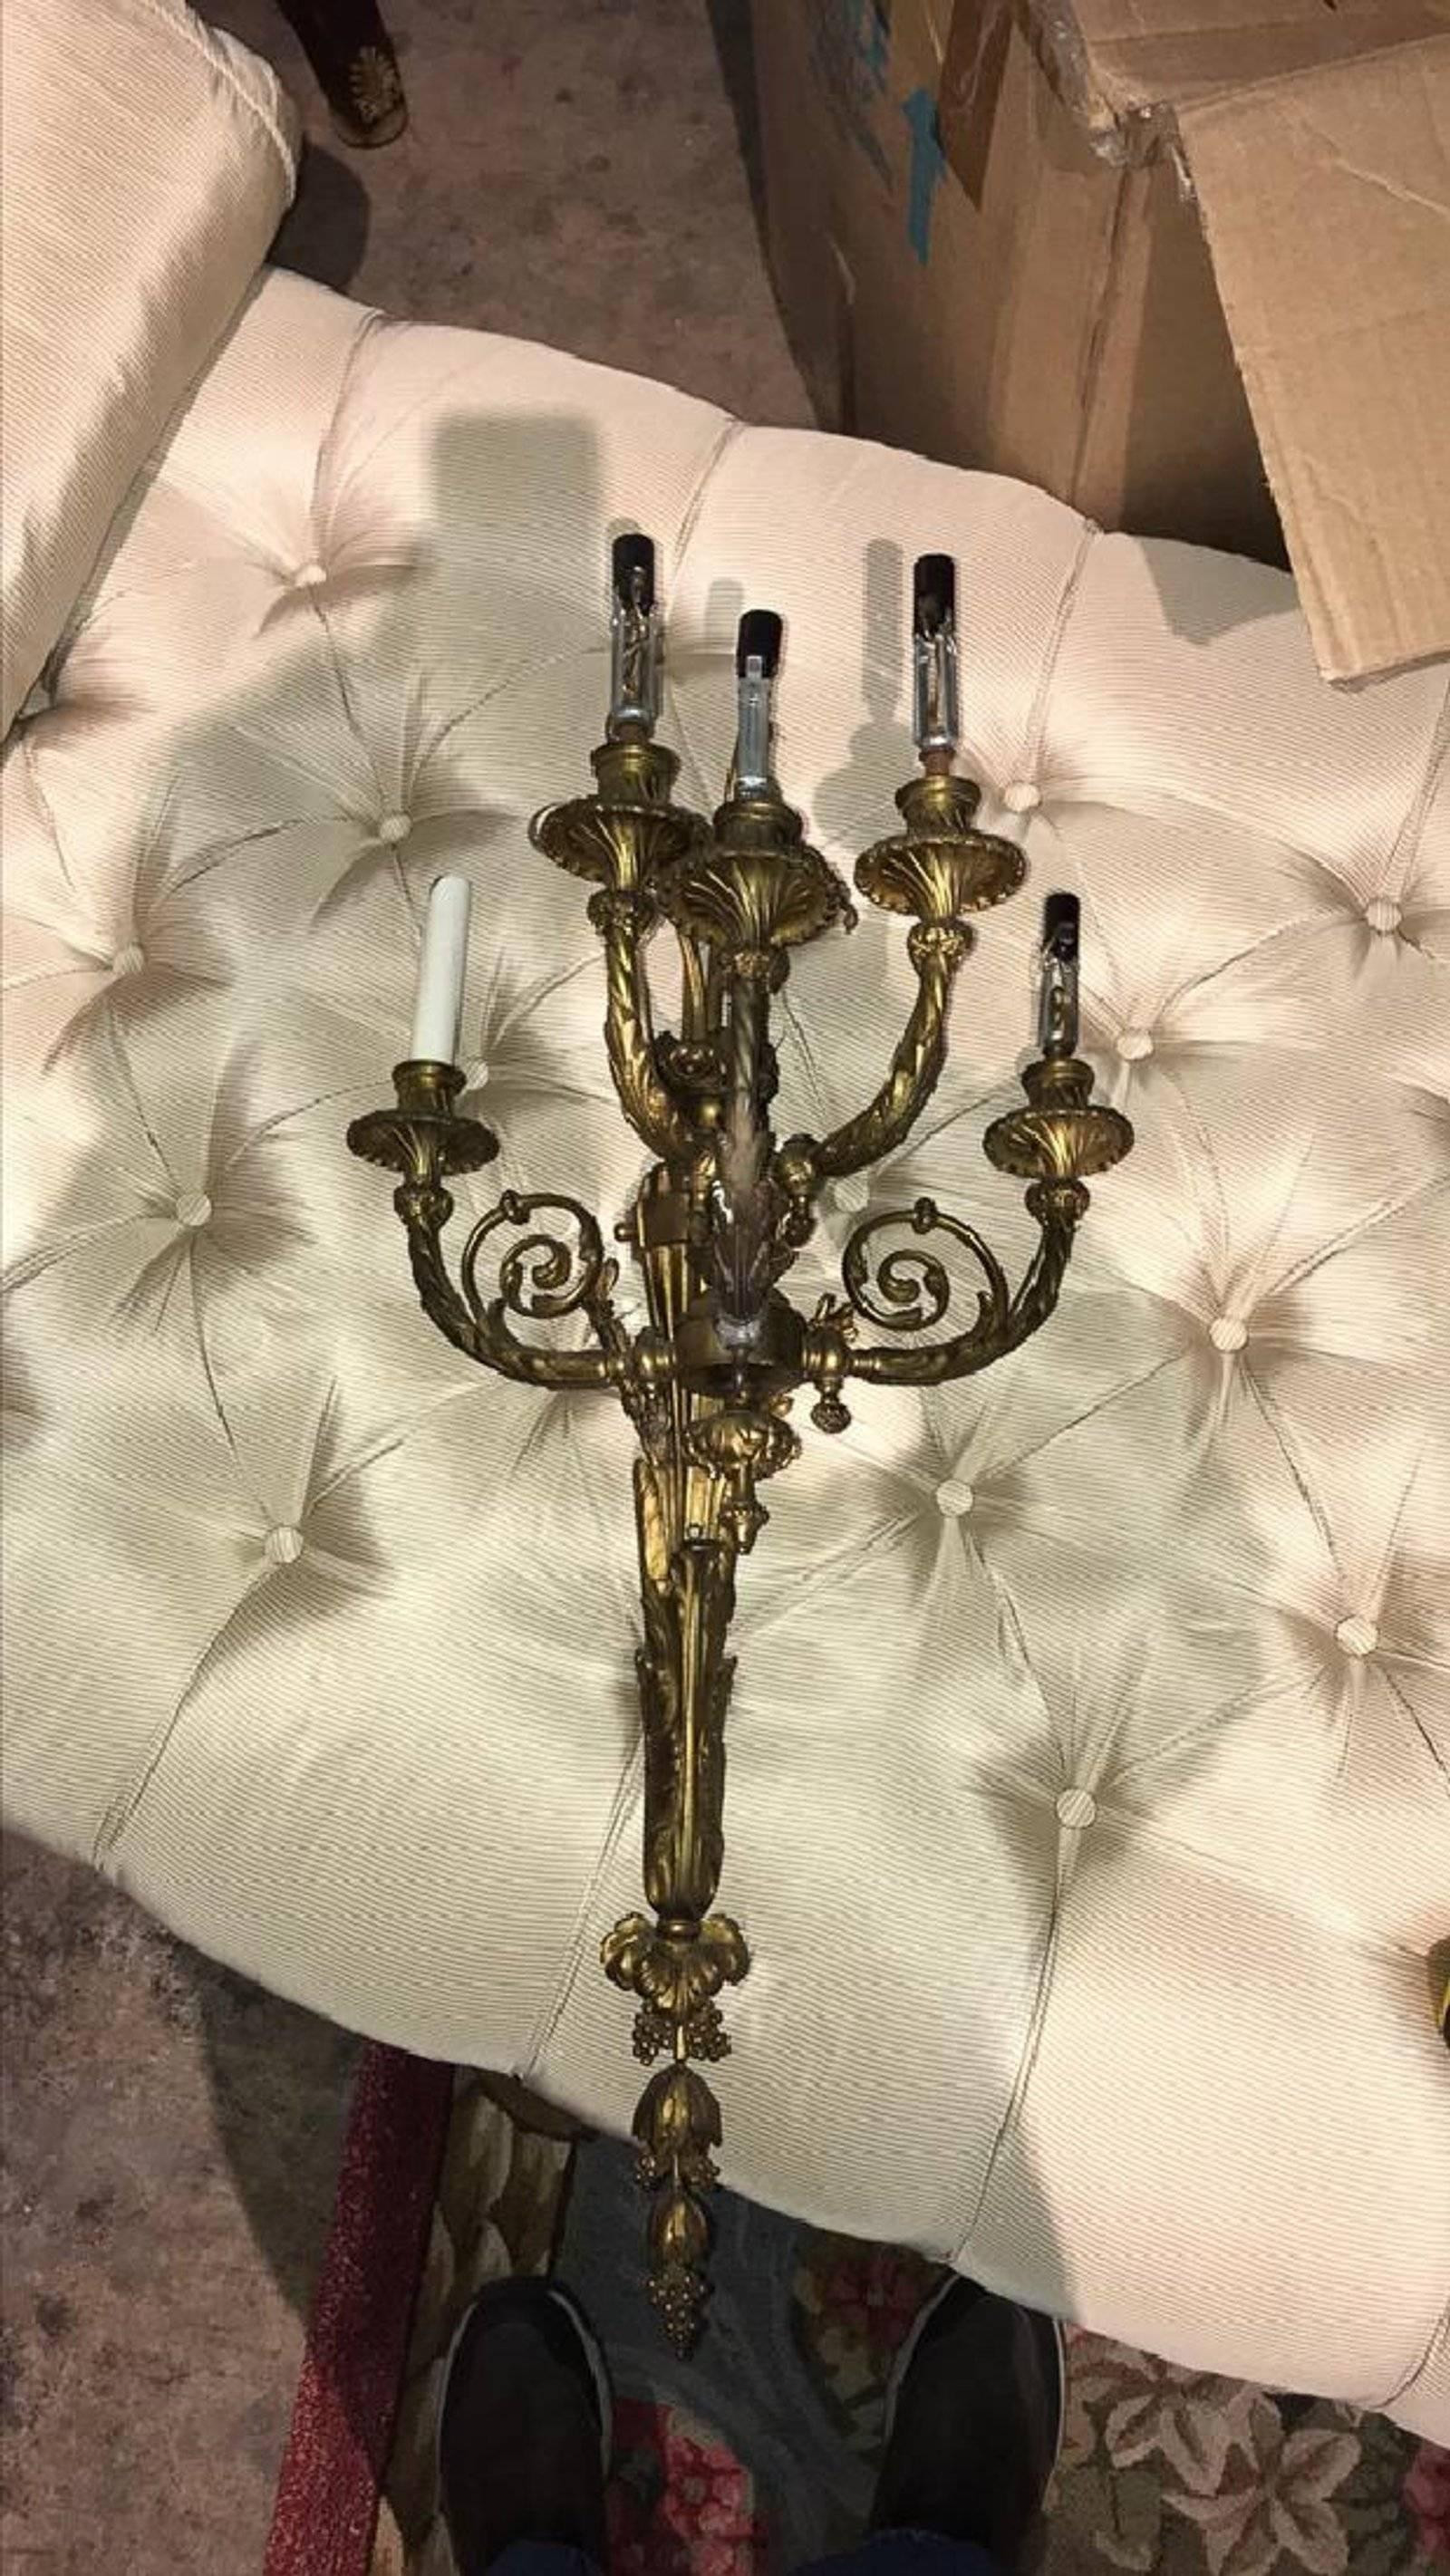 Impressive 19th century French bronze five-light wall sconce in the Rococo Revival style with reticulated leaf scrolls and grape cluster finial.